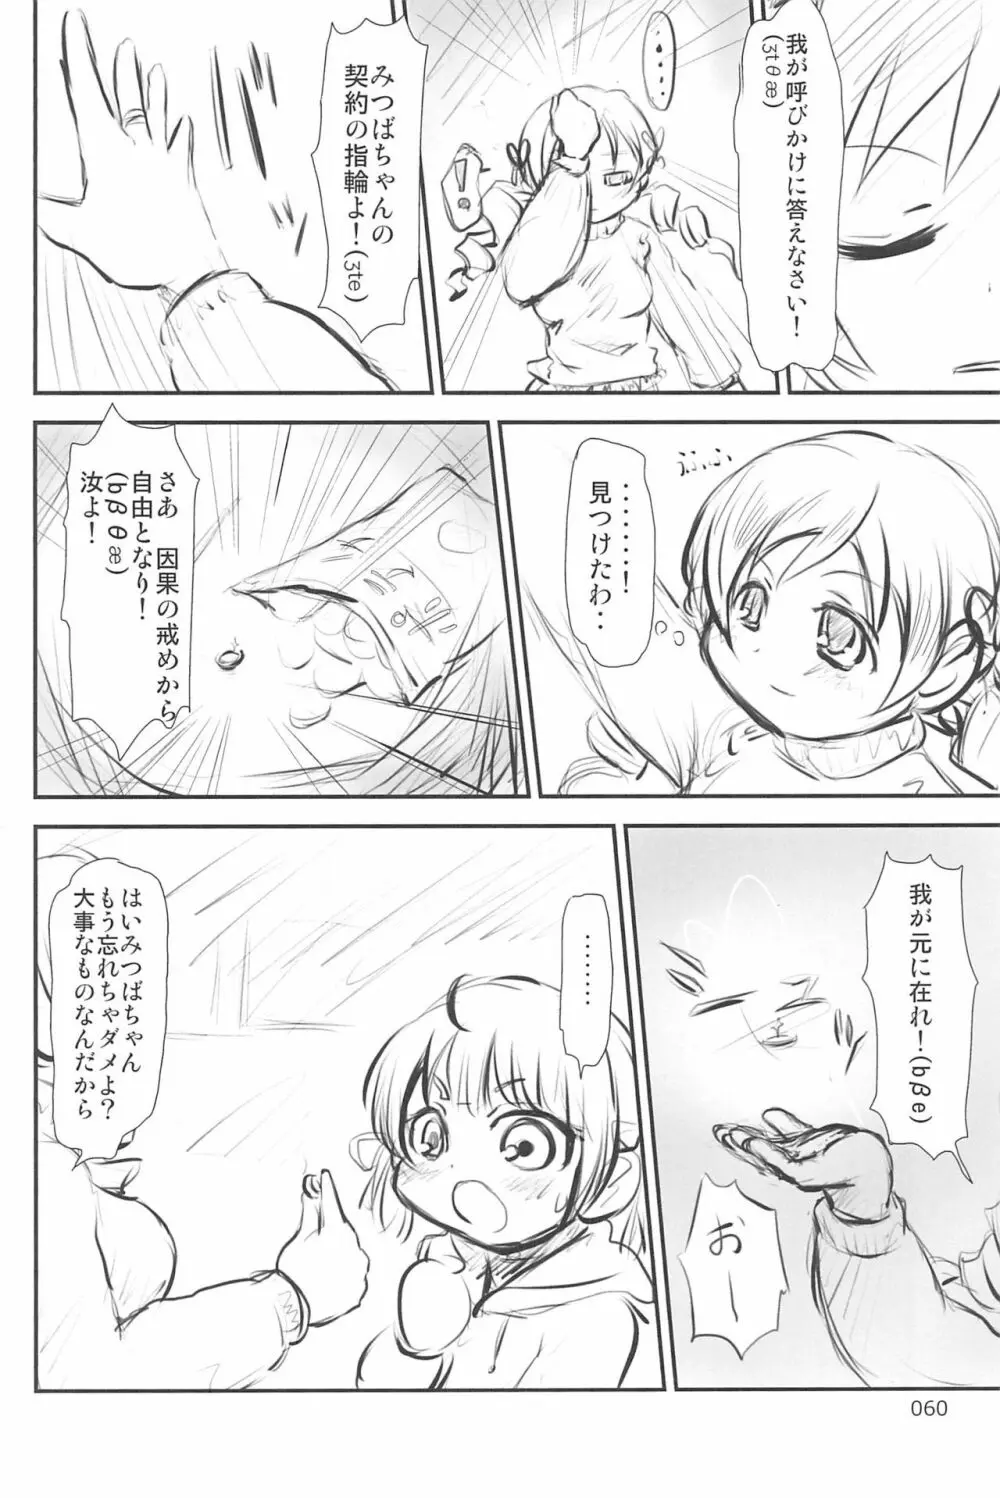 ND-special Volume 6 60ページ